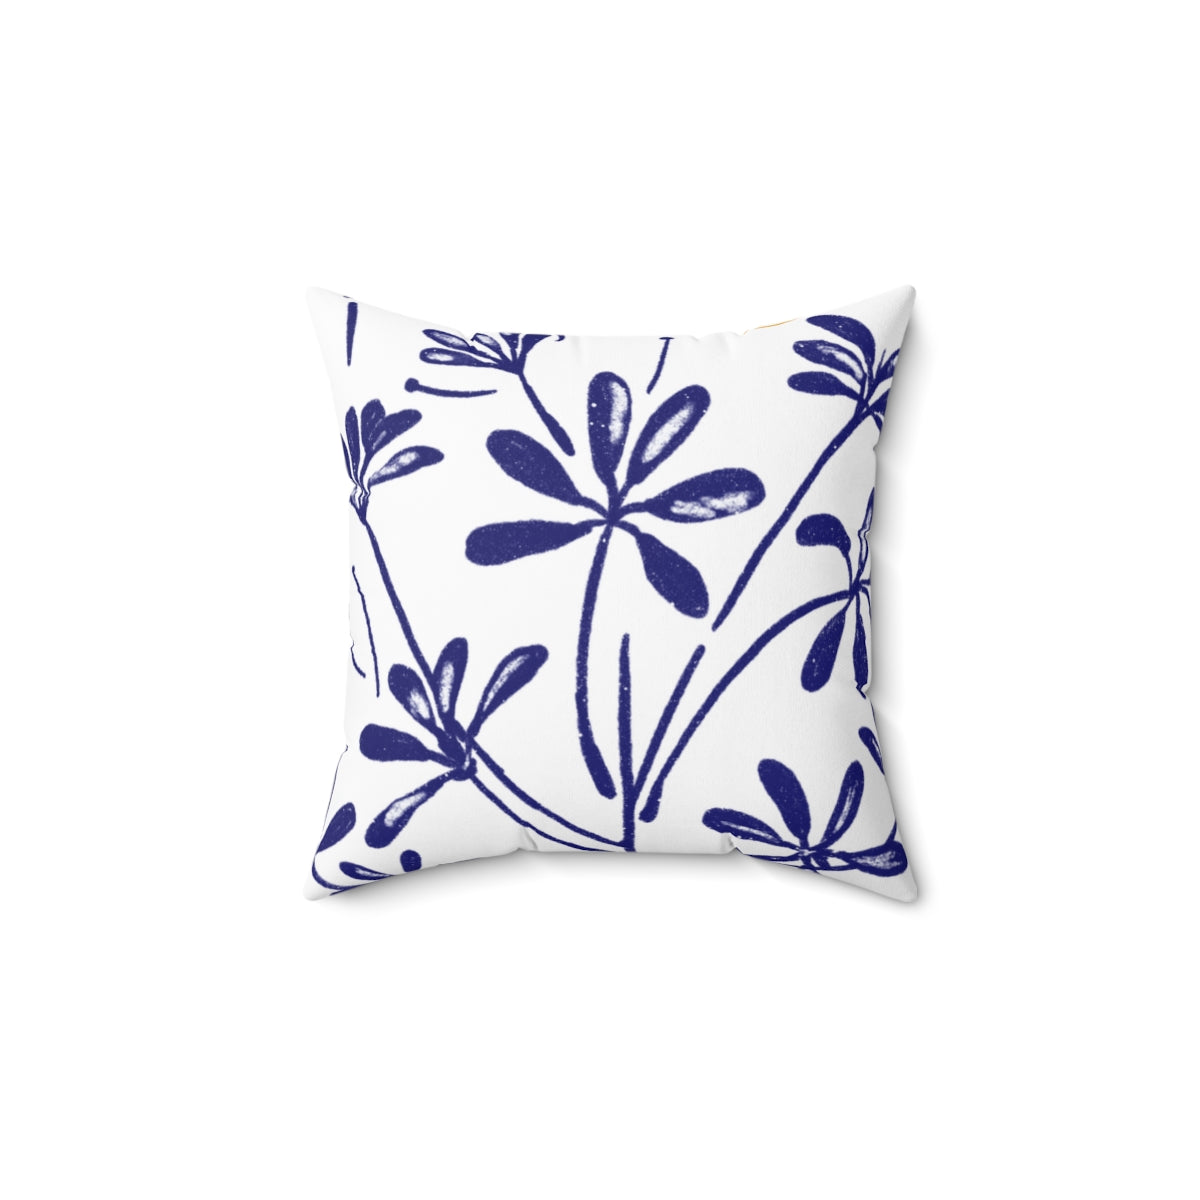 Blue indoor plant Pillow Case - Spun Polyester Square